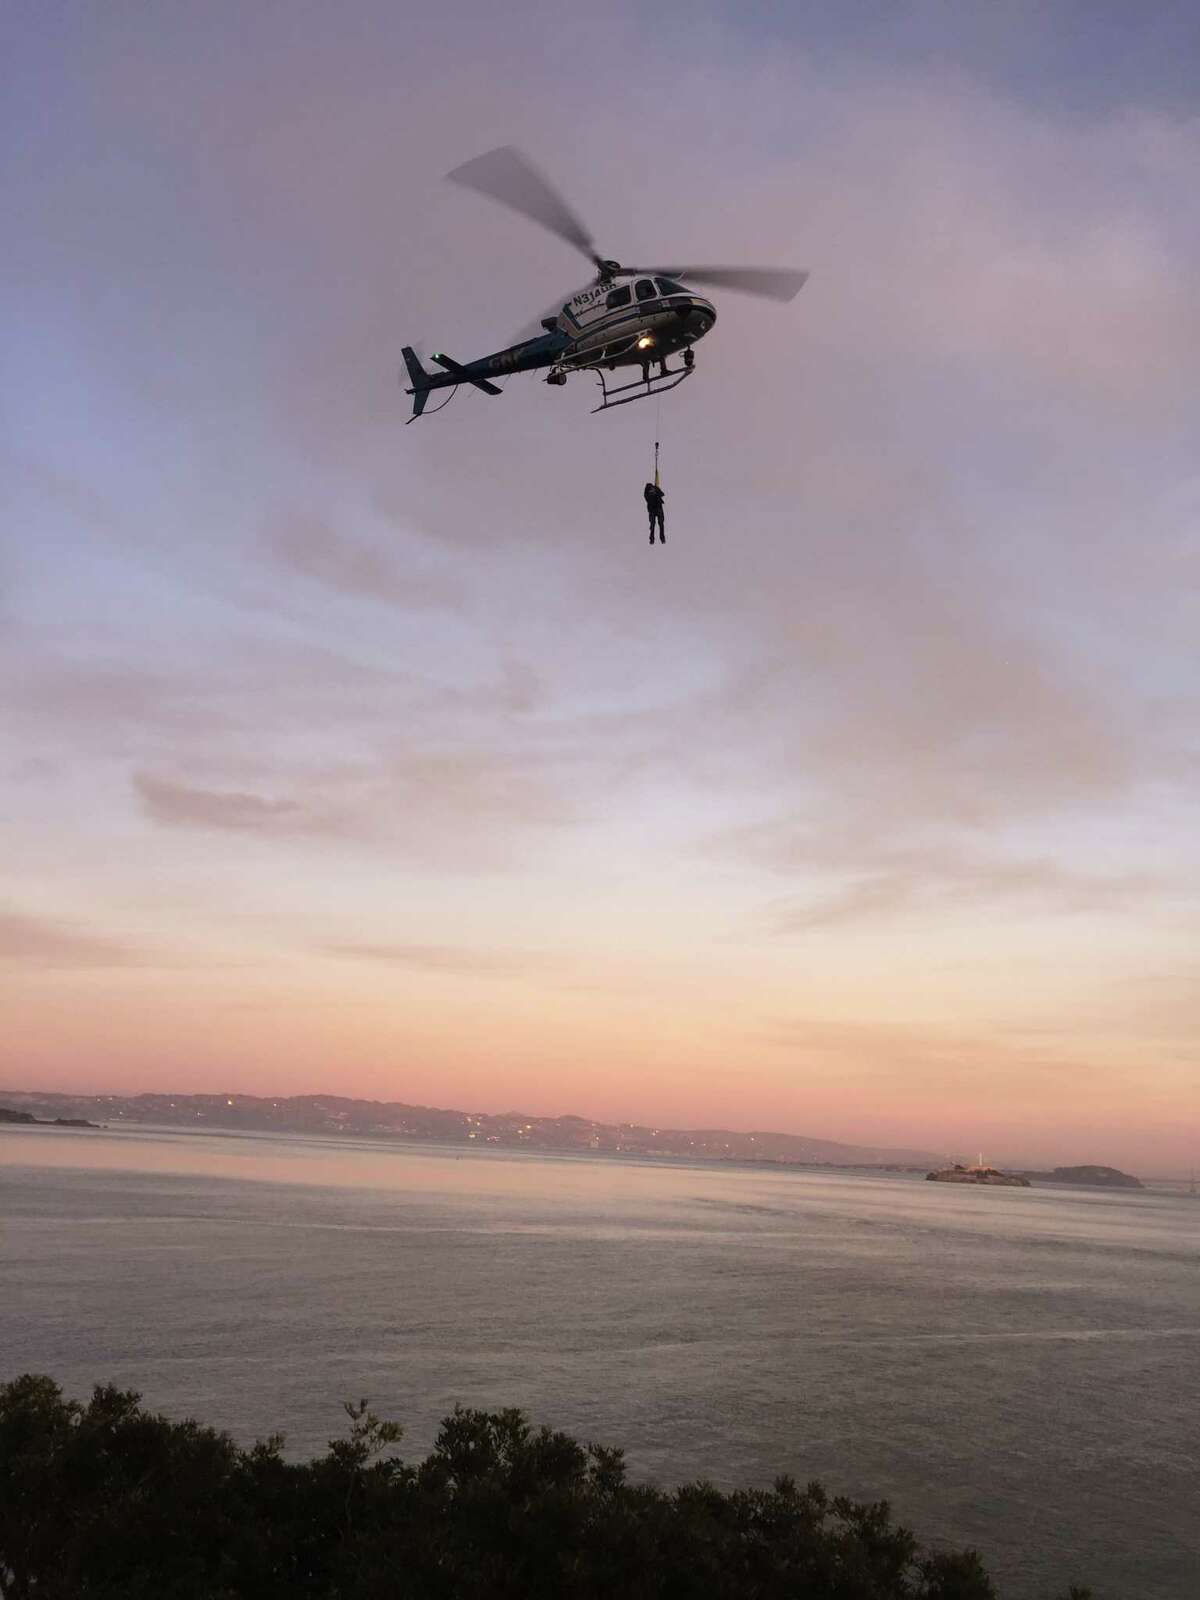 A vandalism suspect was lifted to safety by a California Highway Patrol helicopter after scrambling down a waterfront cliff to avoid arrest near Fort Baker in Marin County on Thursday, officials said.